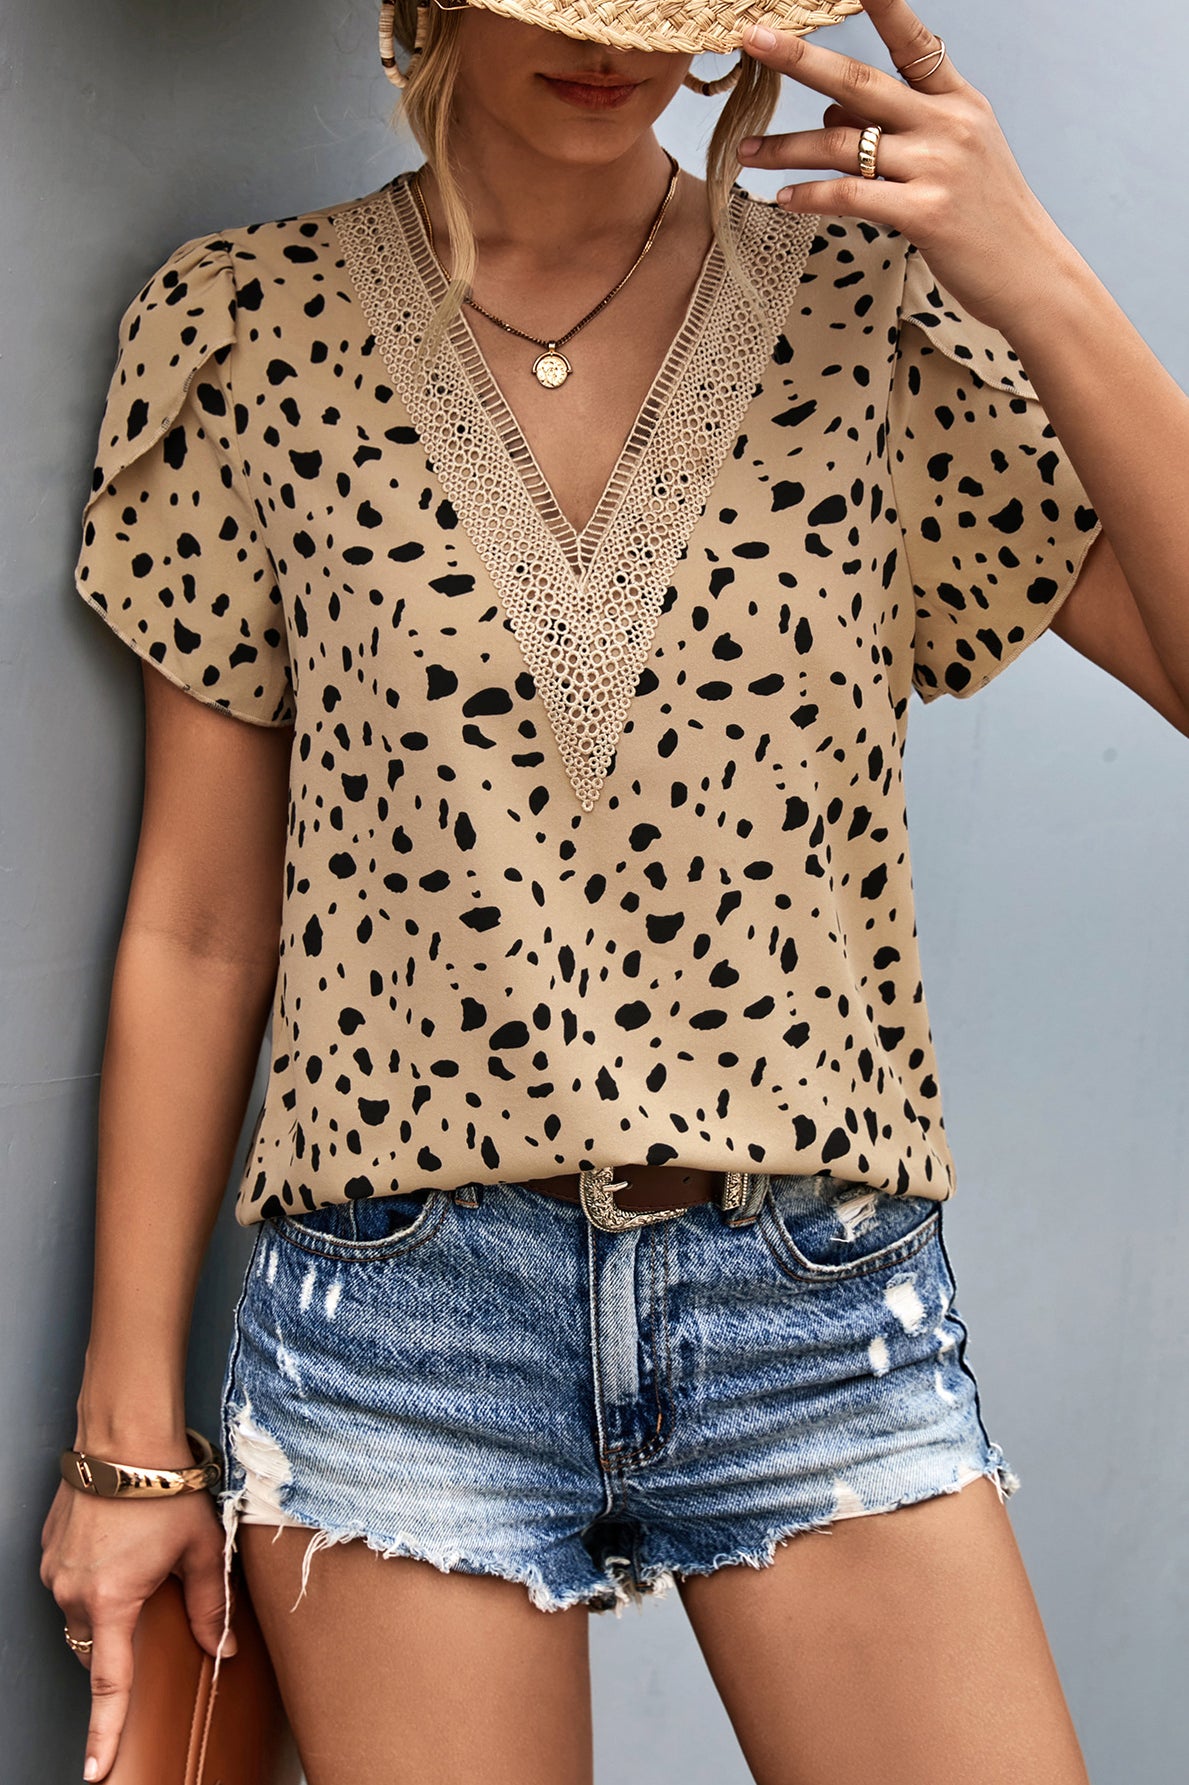 Animal Print V-Neck Petal Sleeve Blouse Casual Chic Boutique